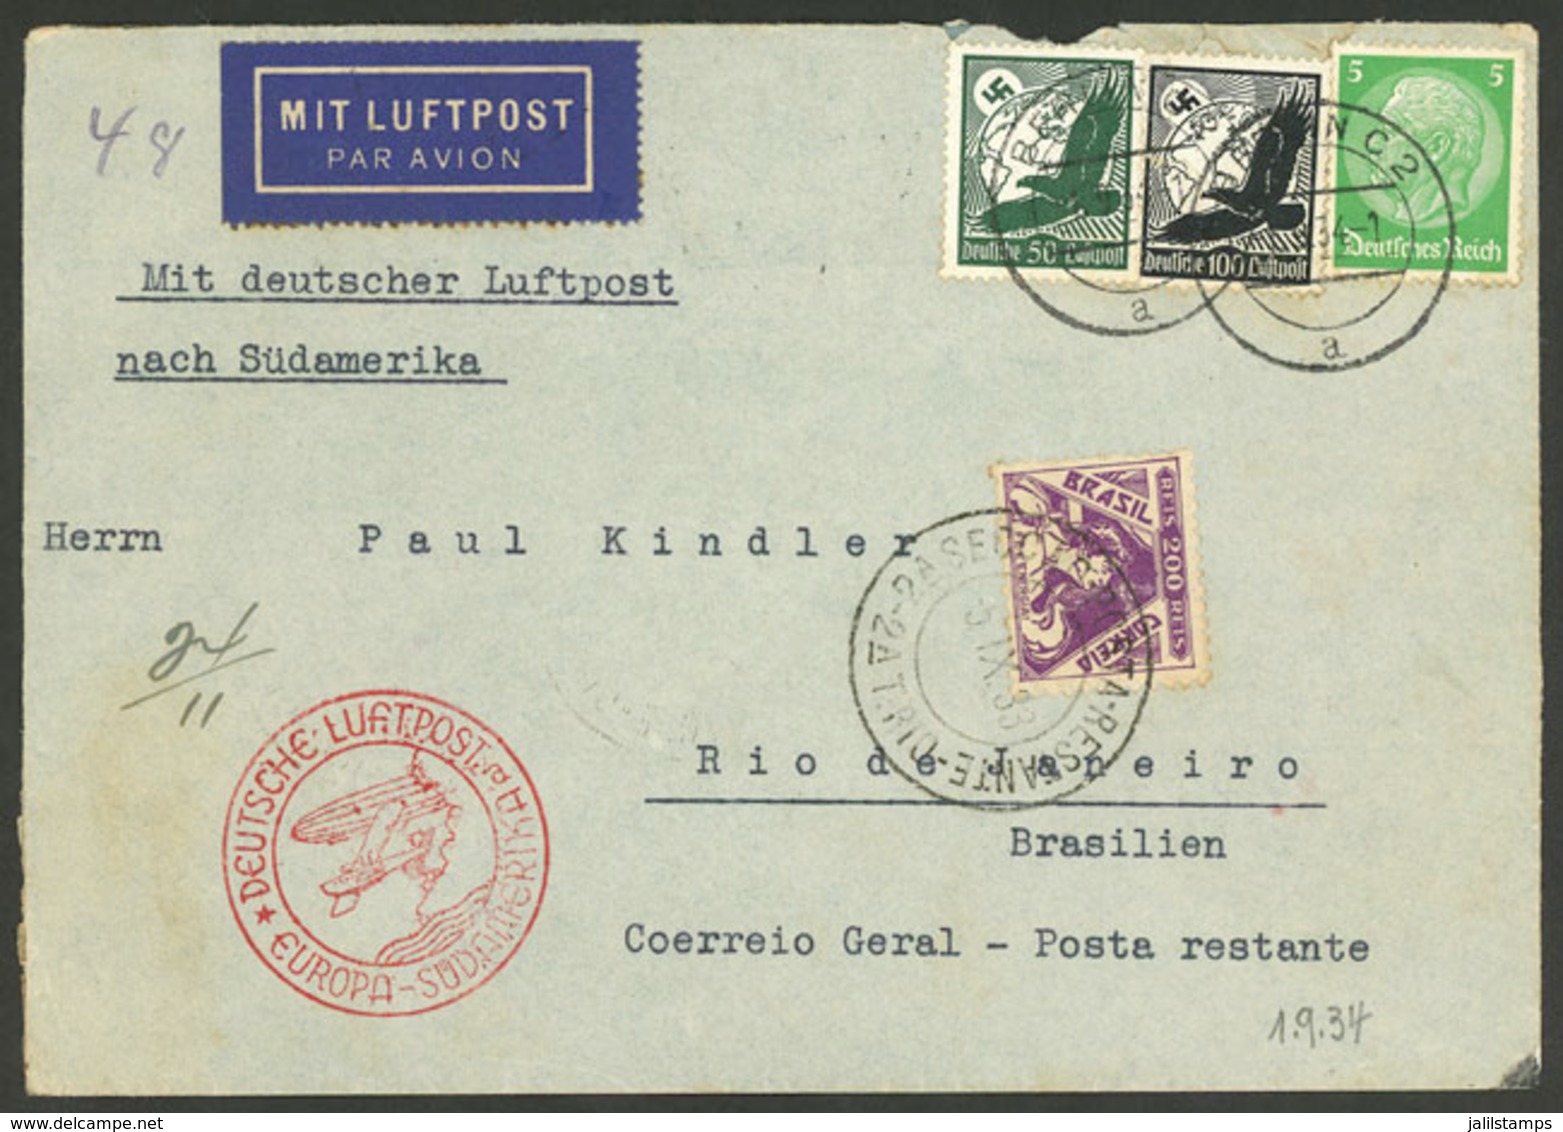 GERMANY: MIXED POSTAGE: Airmail Cover Sent From Berlin To Rio De Janeiro (Poste Restante) On 1/SE/1933, With German Post - Lettres & Documents